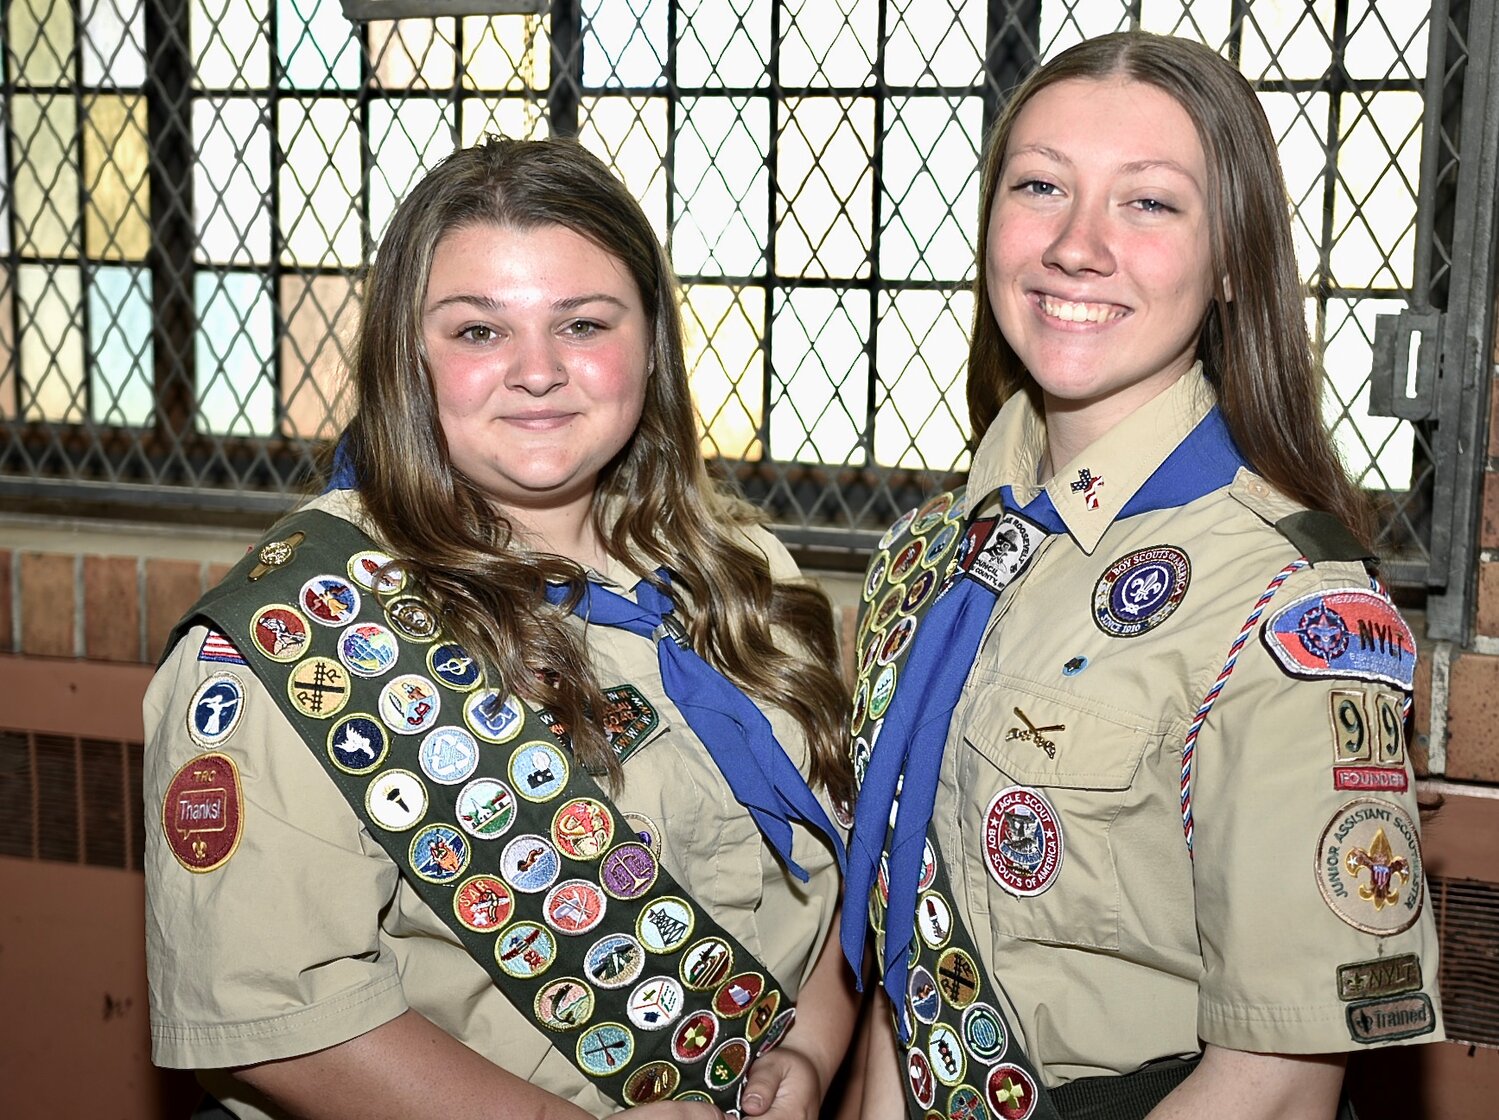 Blair Graham and Gabriella Burke, of the all-female Boy Scout Troop 99 in Valley Stream, were honored for achieving the Eagle Scout rank, the highest distinction in scouting, last Sunday.